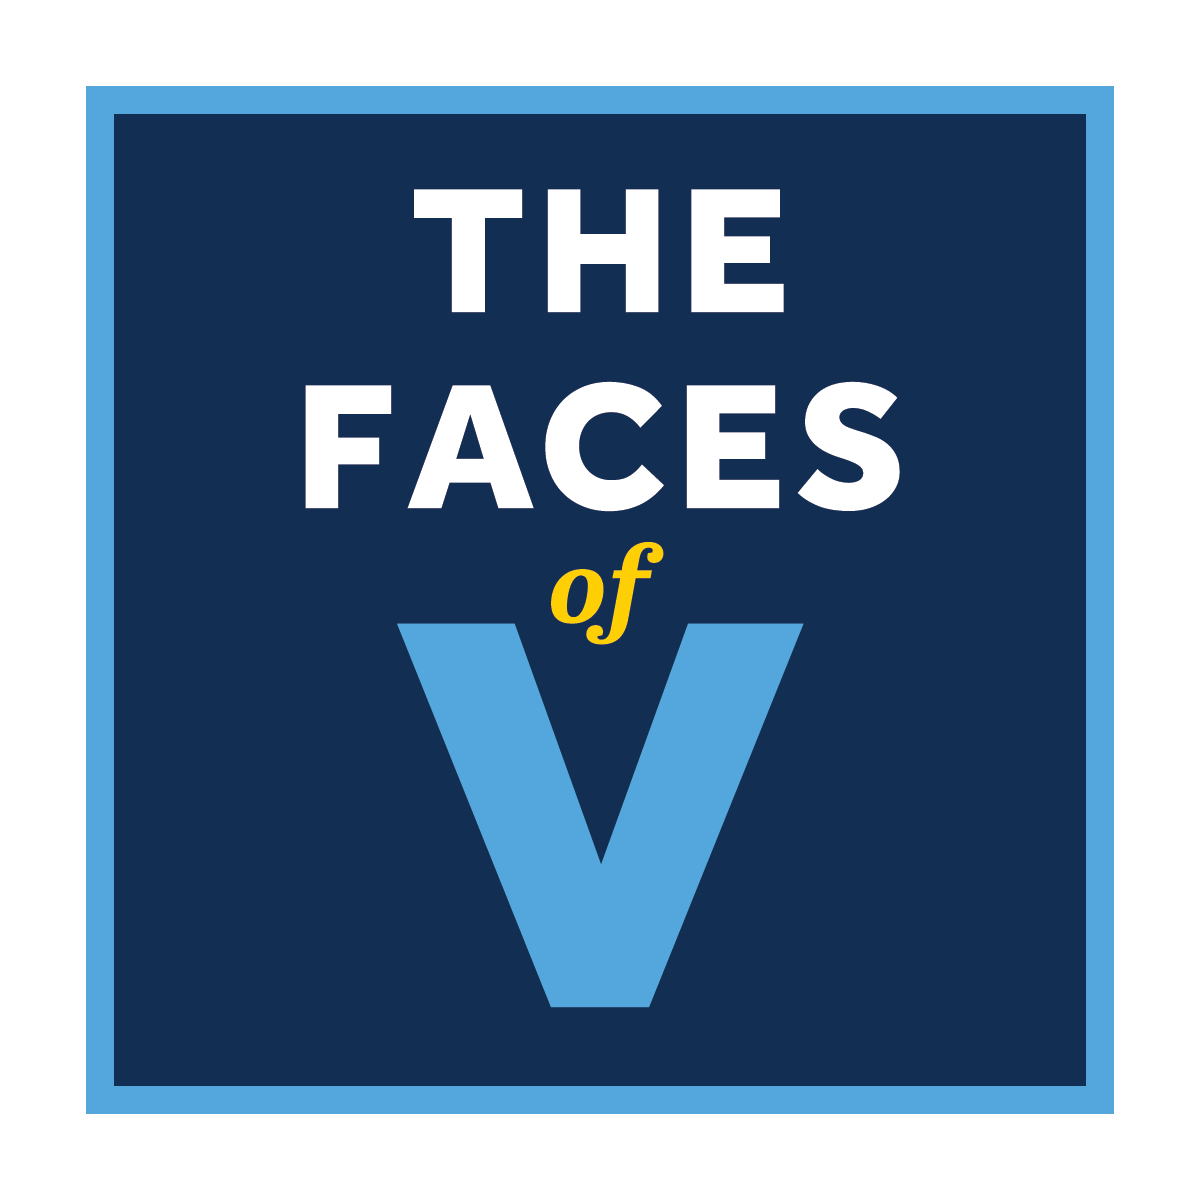 Client: The Faces of V (Measure V iniative. Helped design a logo and motion graphic video placeholder for Measure V in the 2018 general election in California.